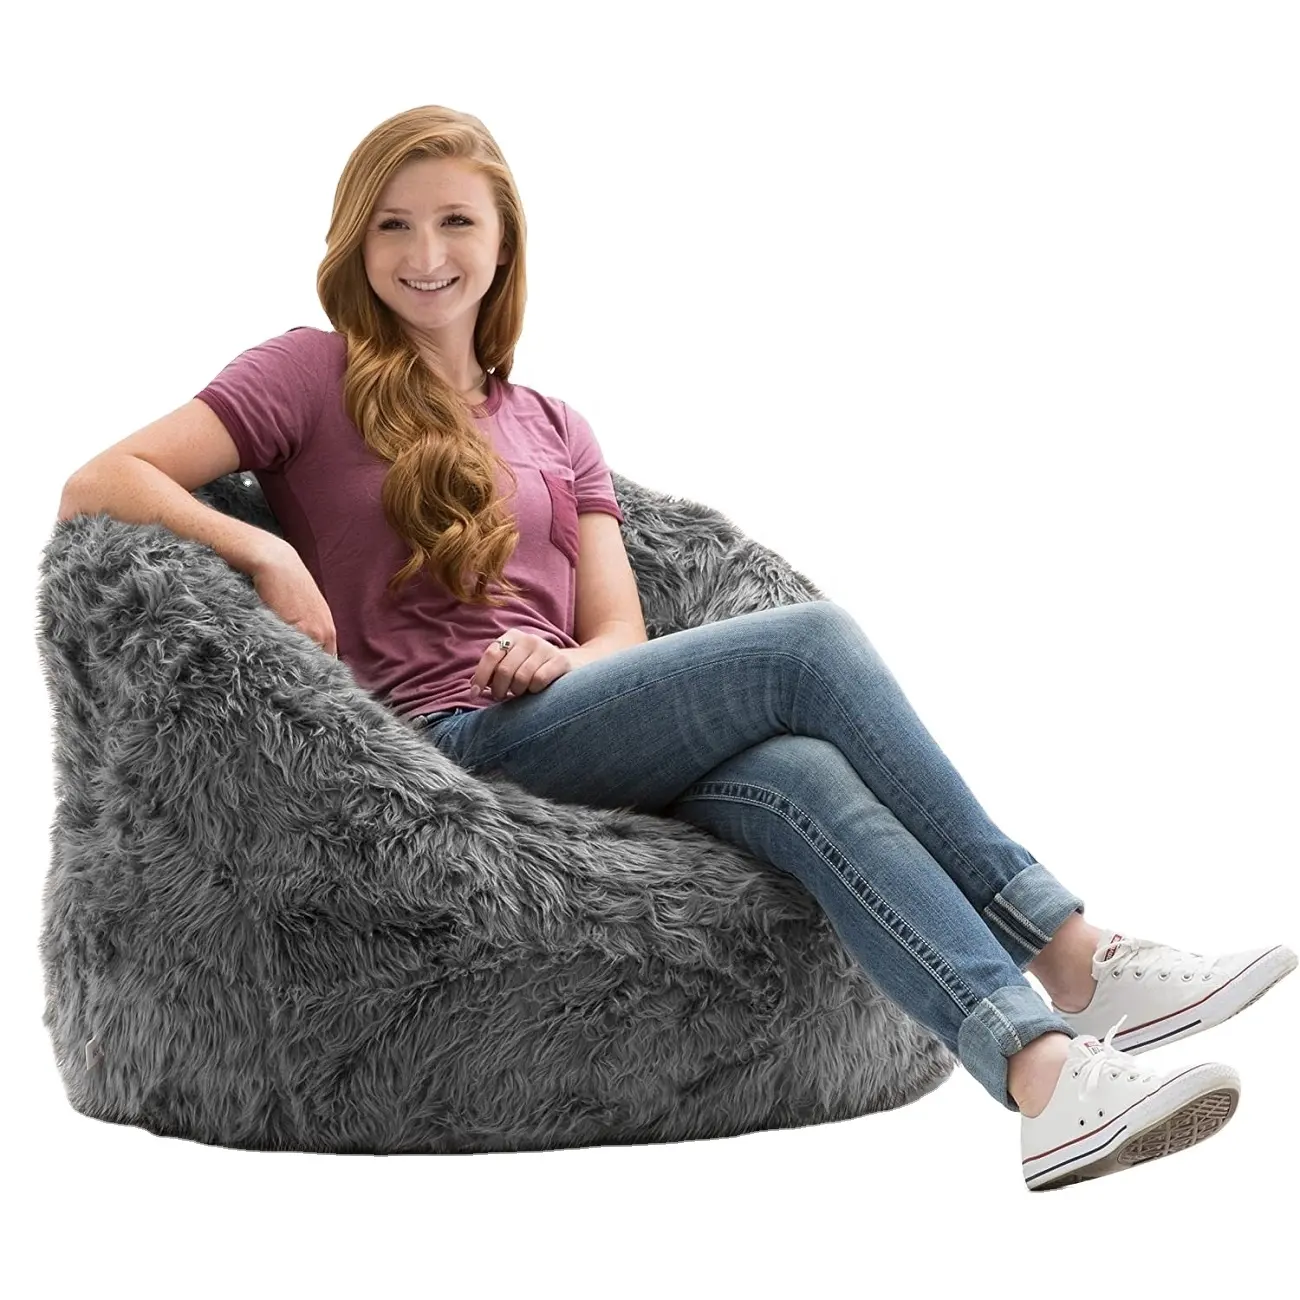 GEEKSOFA Hot Selling Modern Comfortable Design Bean Bag Giant Kids Chair And Adult Lazy Sofa For Playing Room